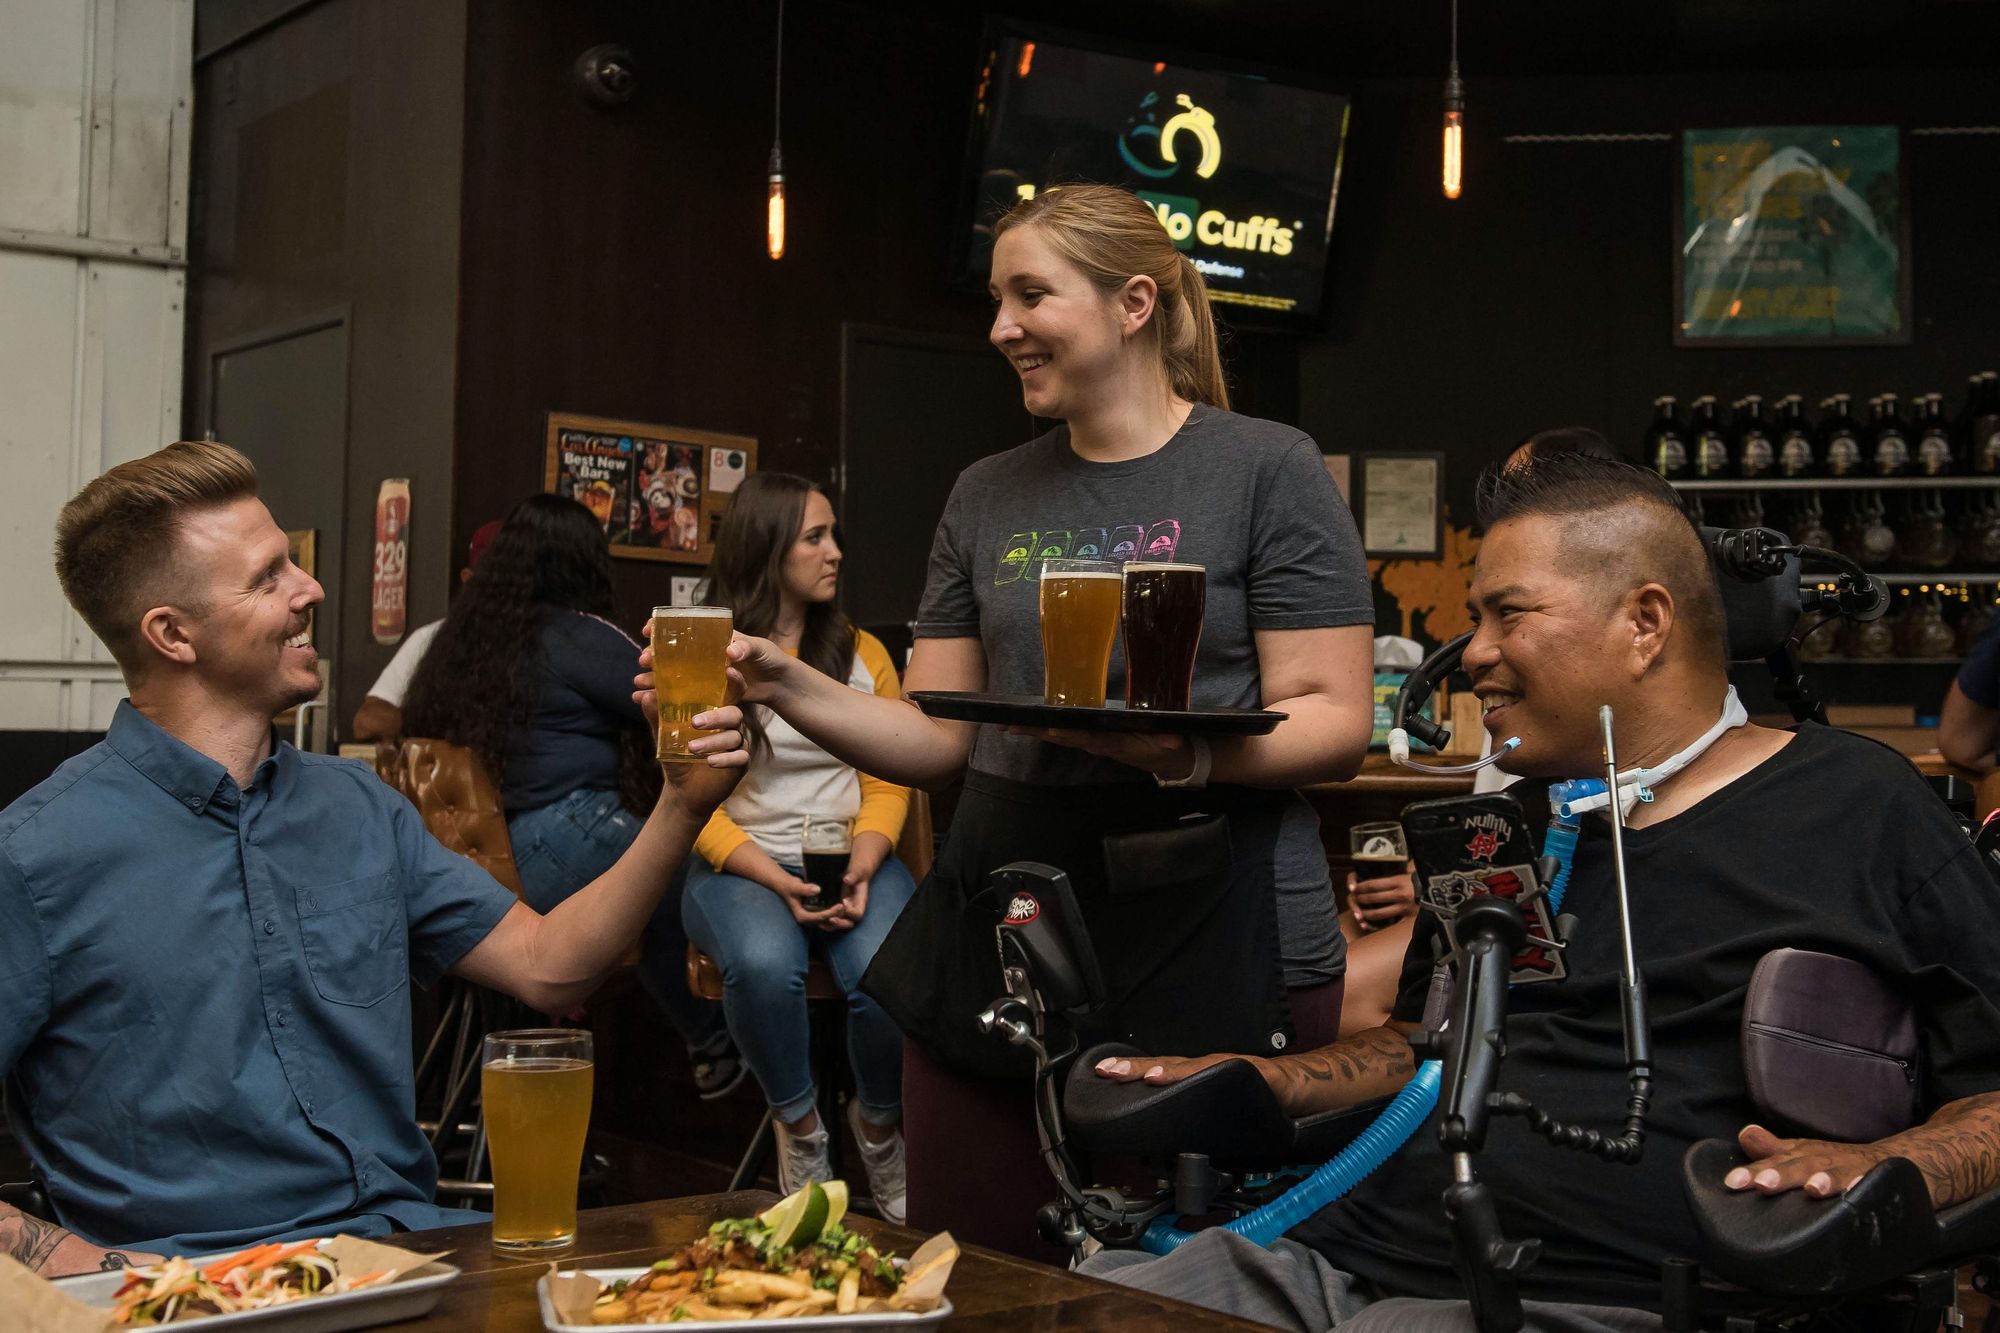 photo of a female waitress serving a beer to customers, one of which is physically disabled